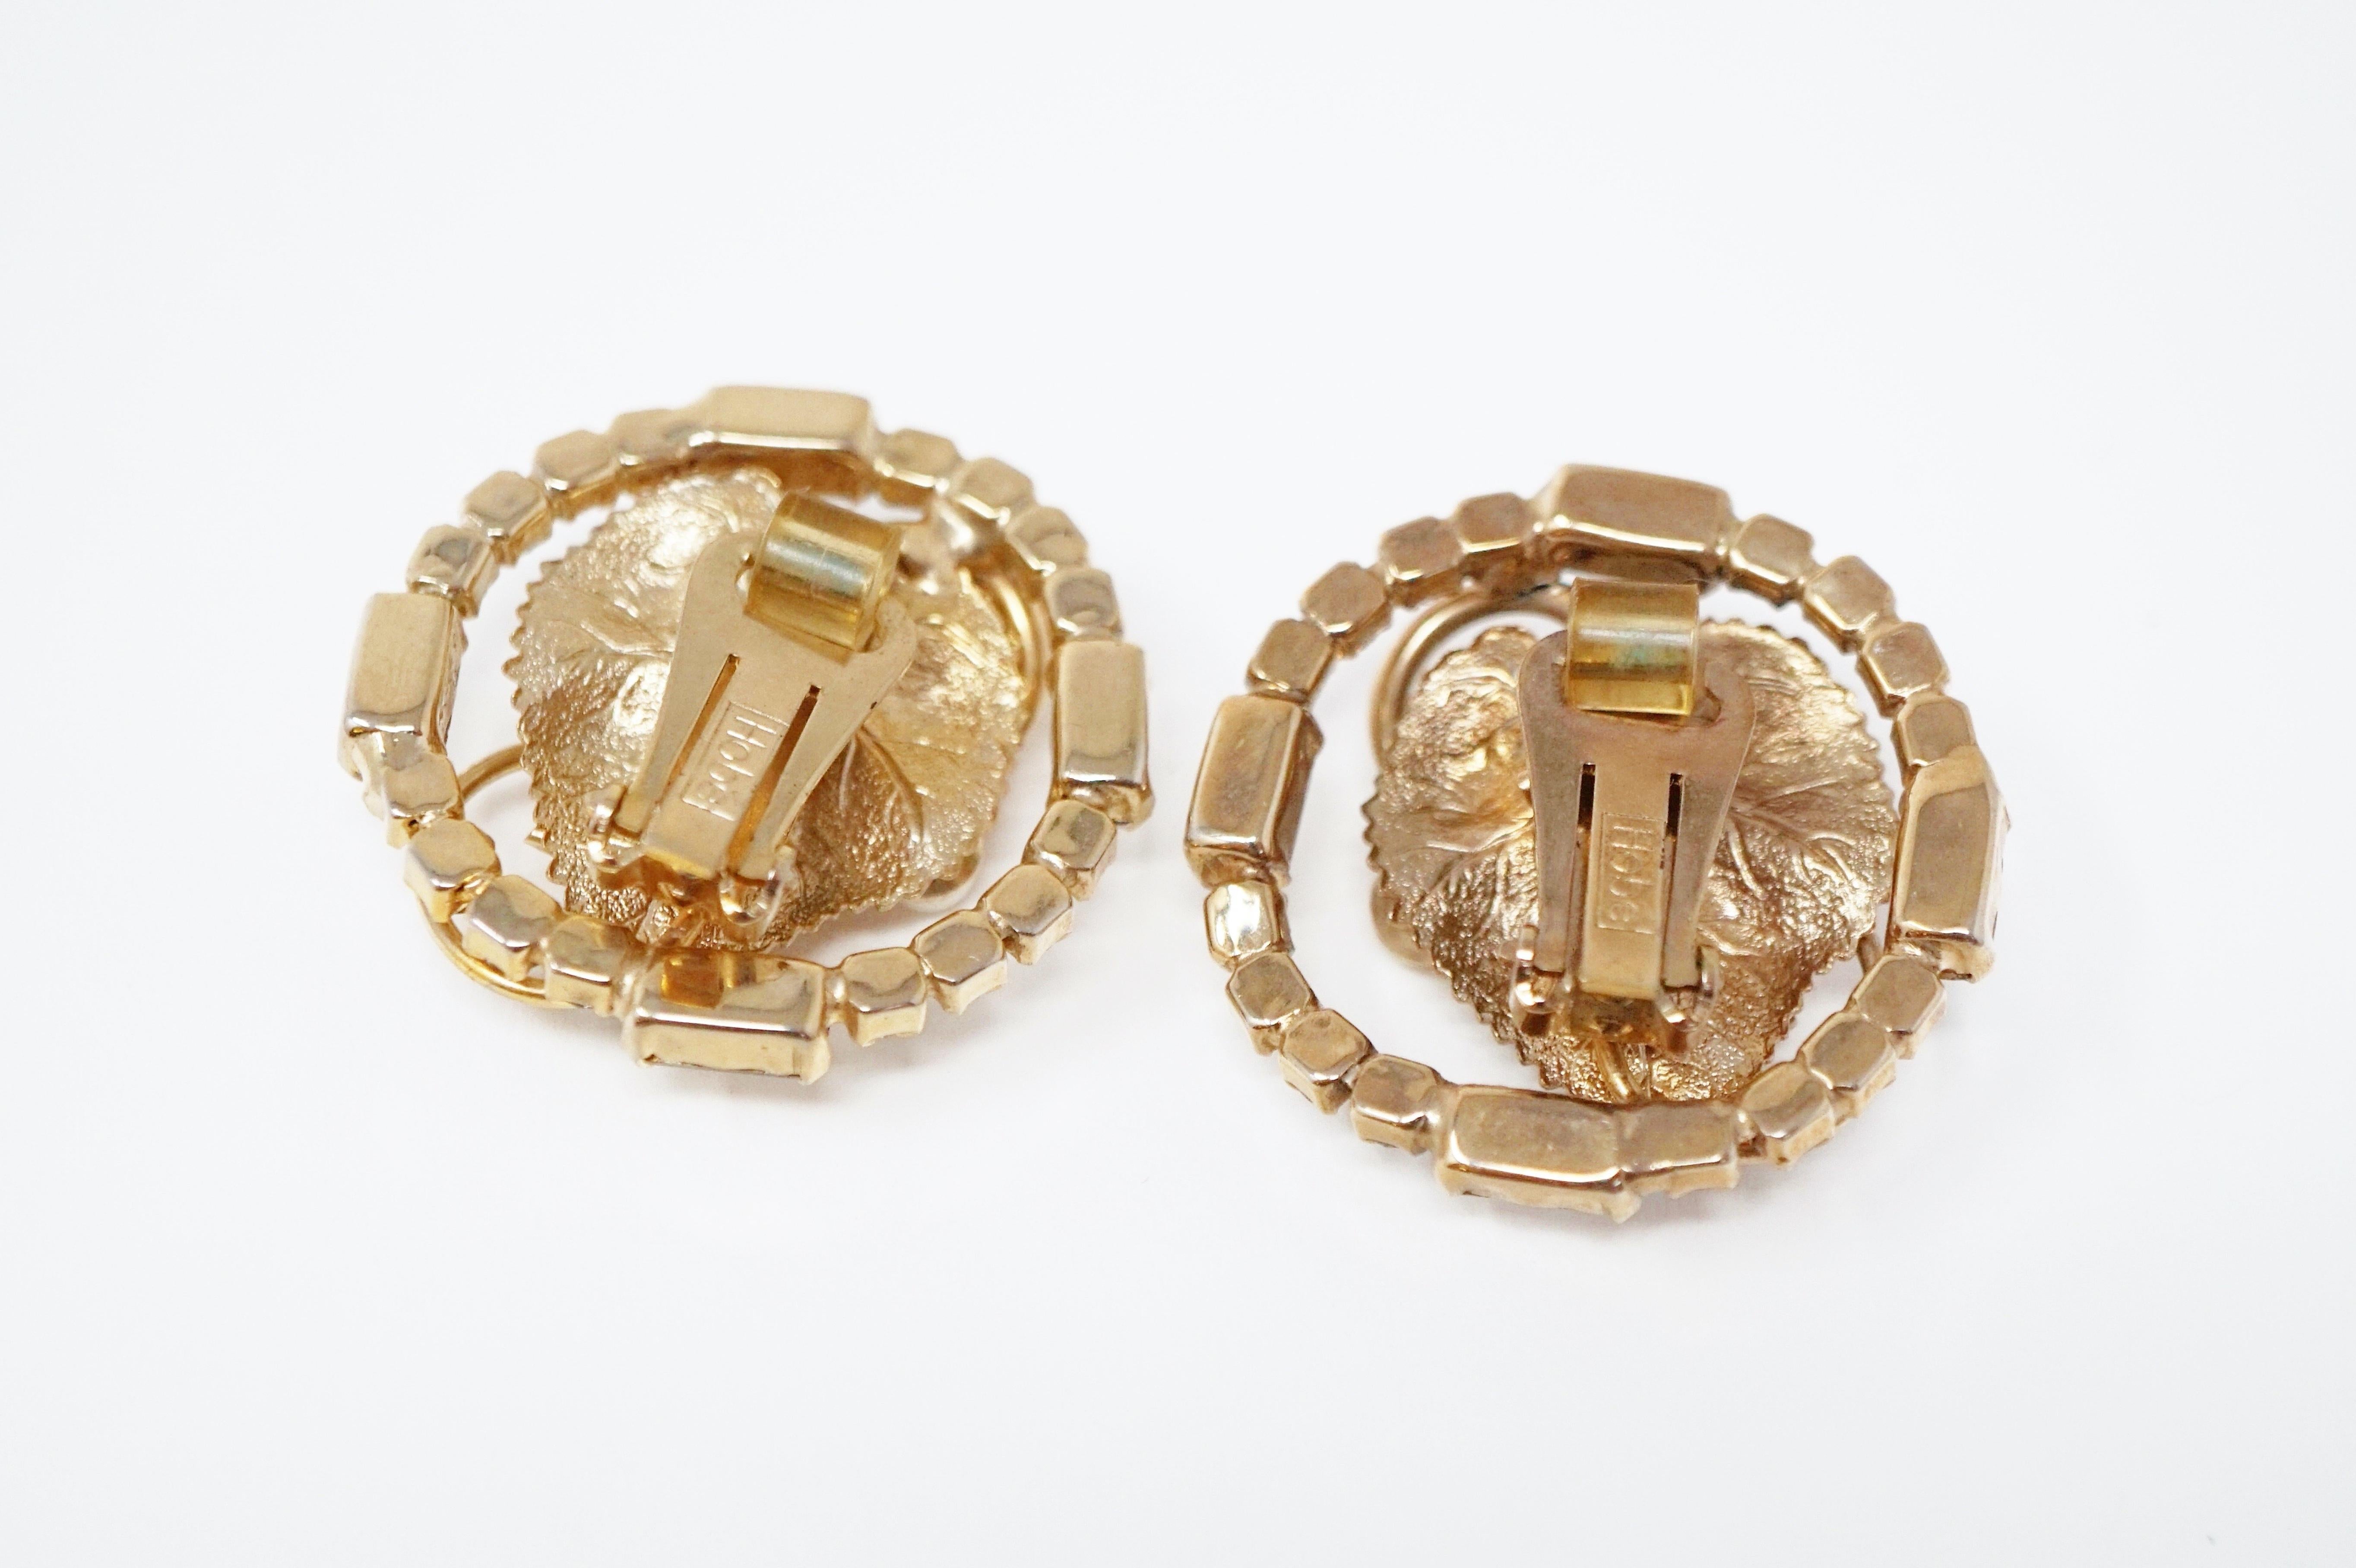 Gilded Leaf Rhinestone Earrings by Hobé, Signed circa 1950s For Sale 5